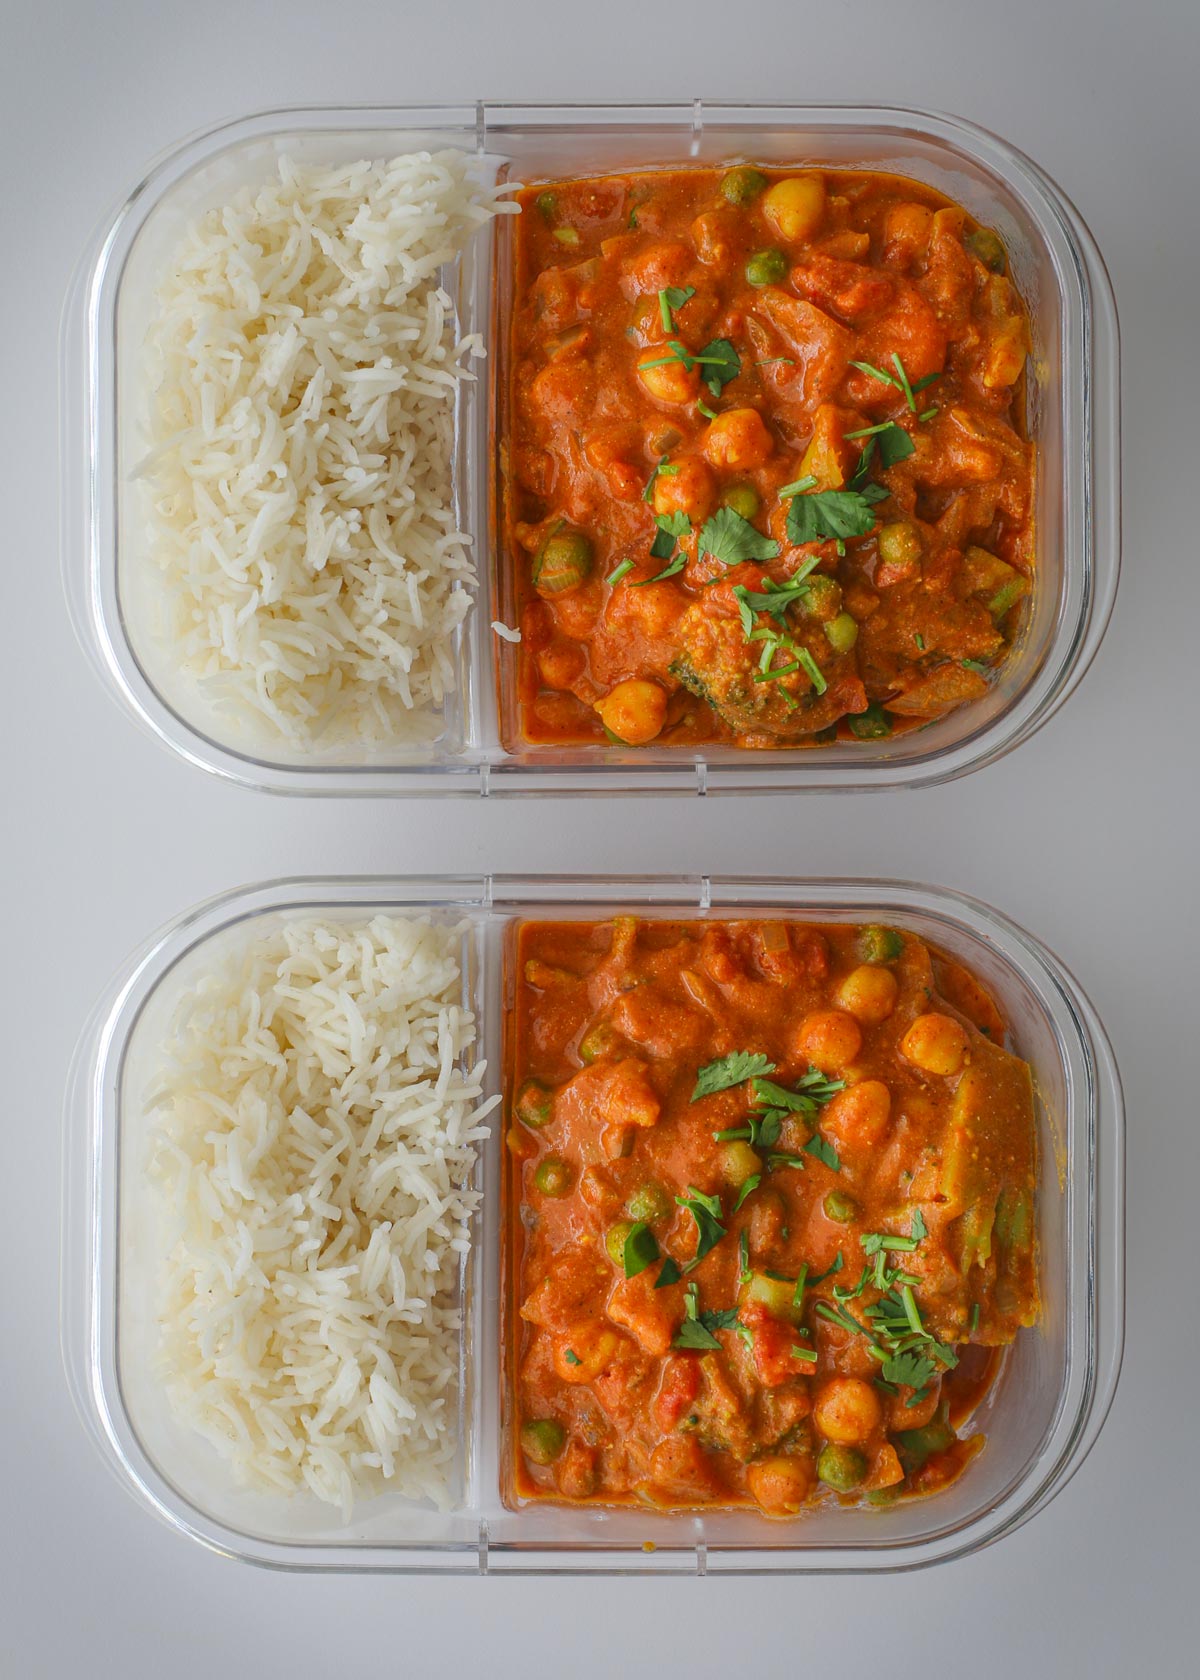 meal prep dishes full of veggie curry.